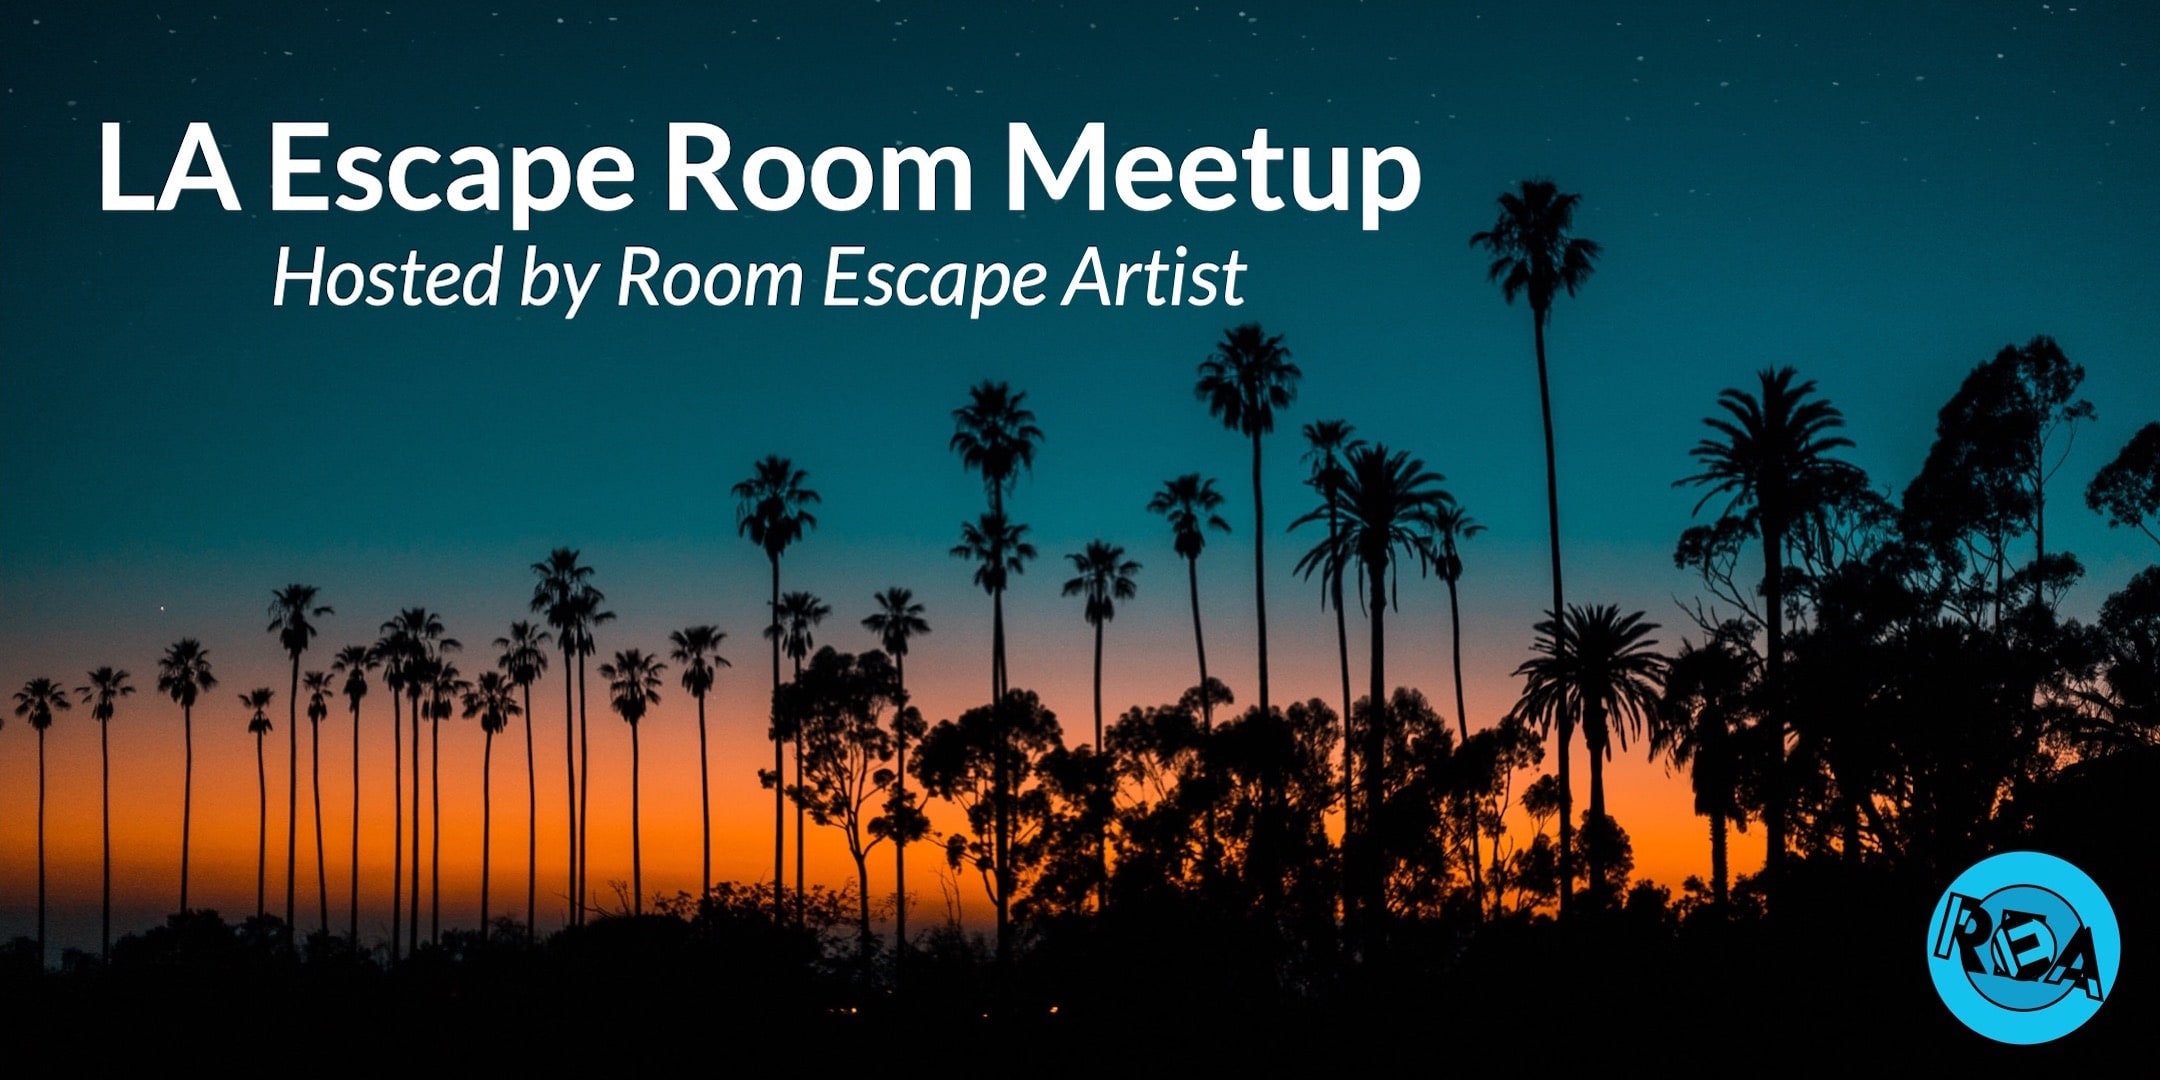 Los Angeles: We’re Hosting an Escape Room Meetup in January!